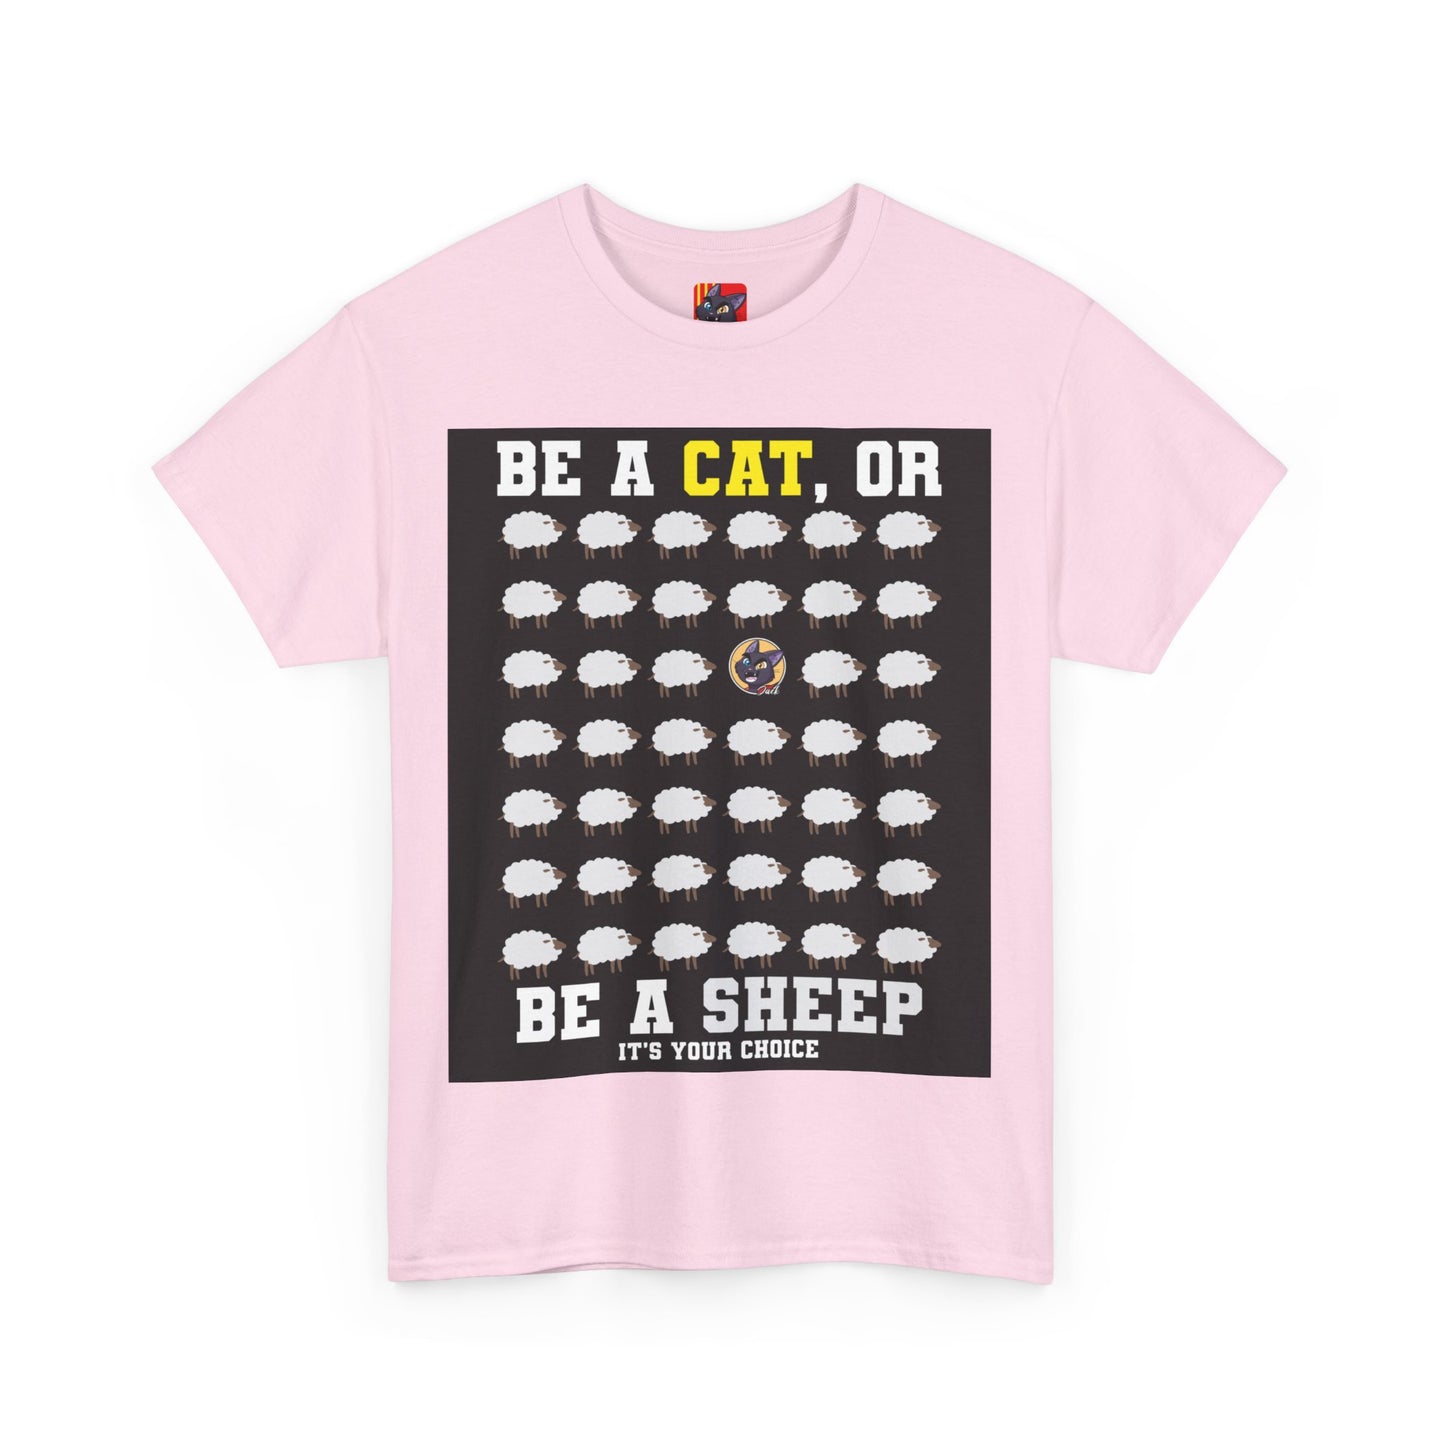 The Critical Thinker T-Shirt: Be a cat or be a sheep it's your choice